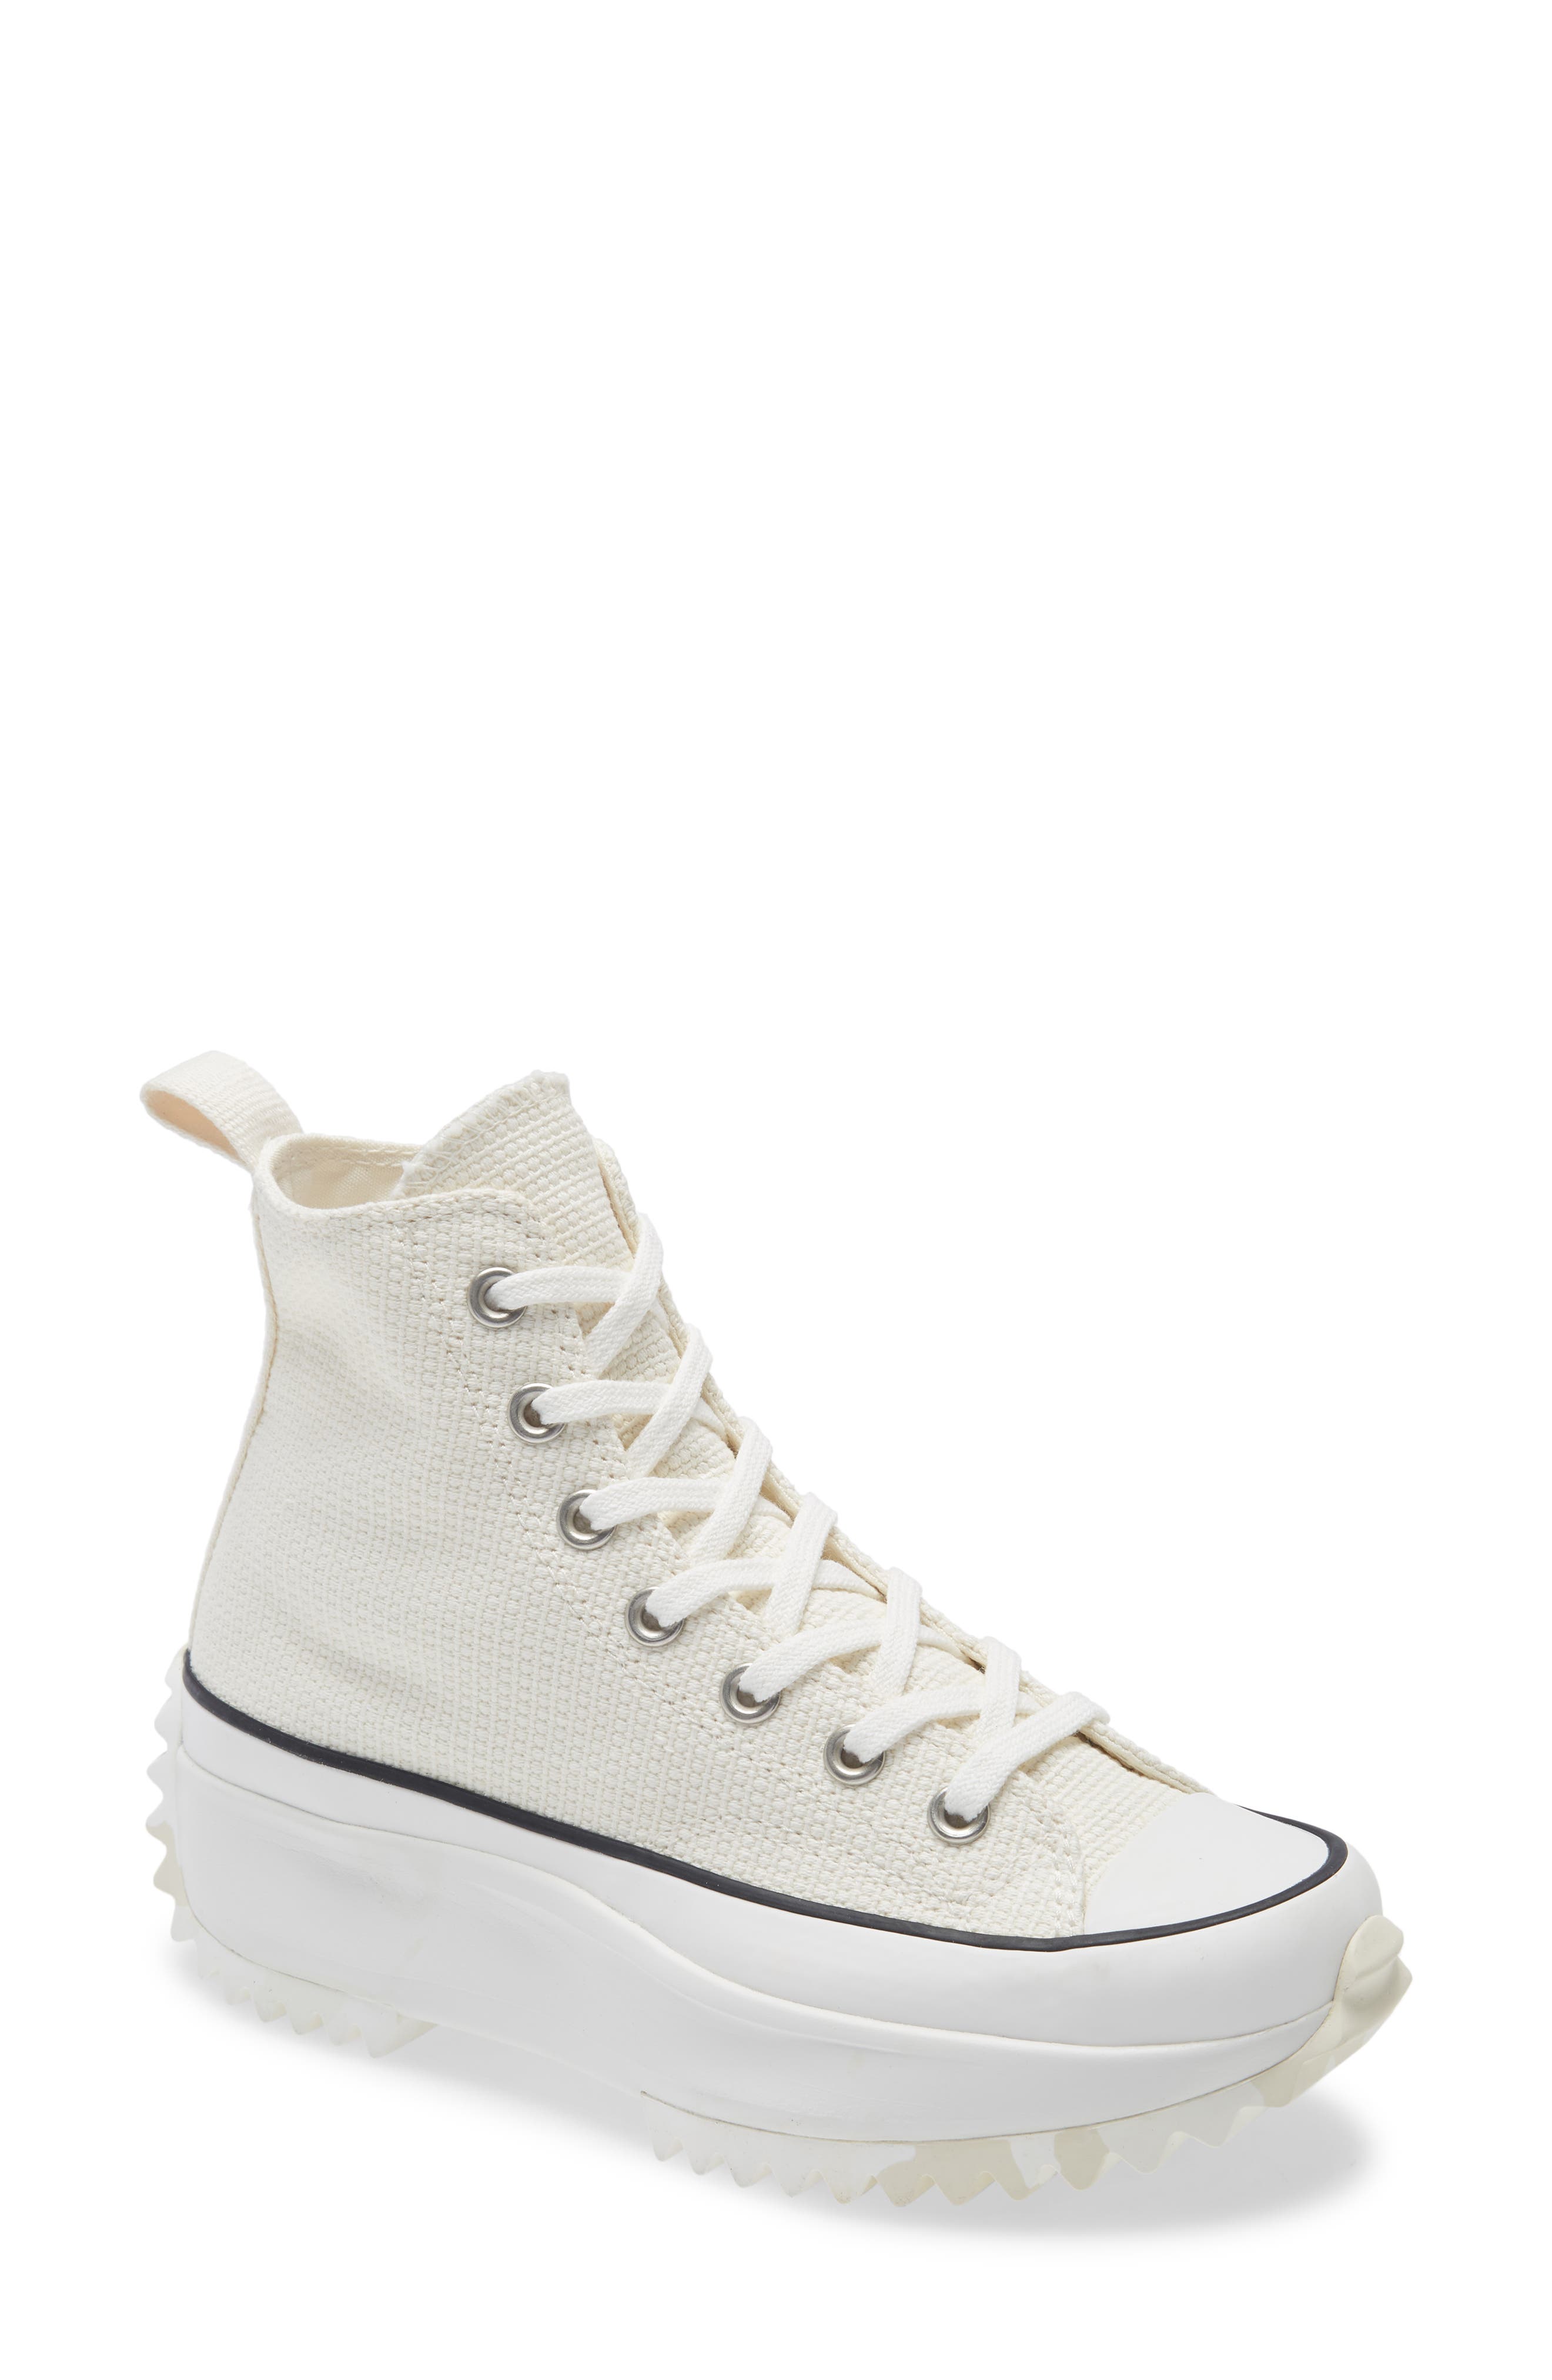 Ivory Converse | Nordstrom